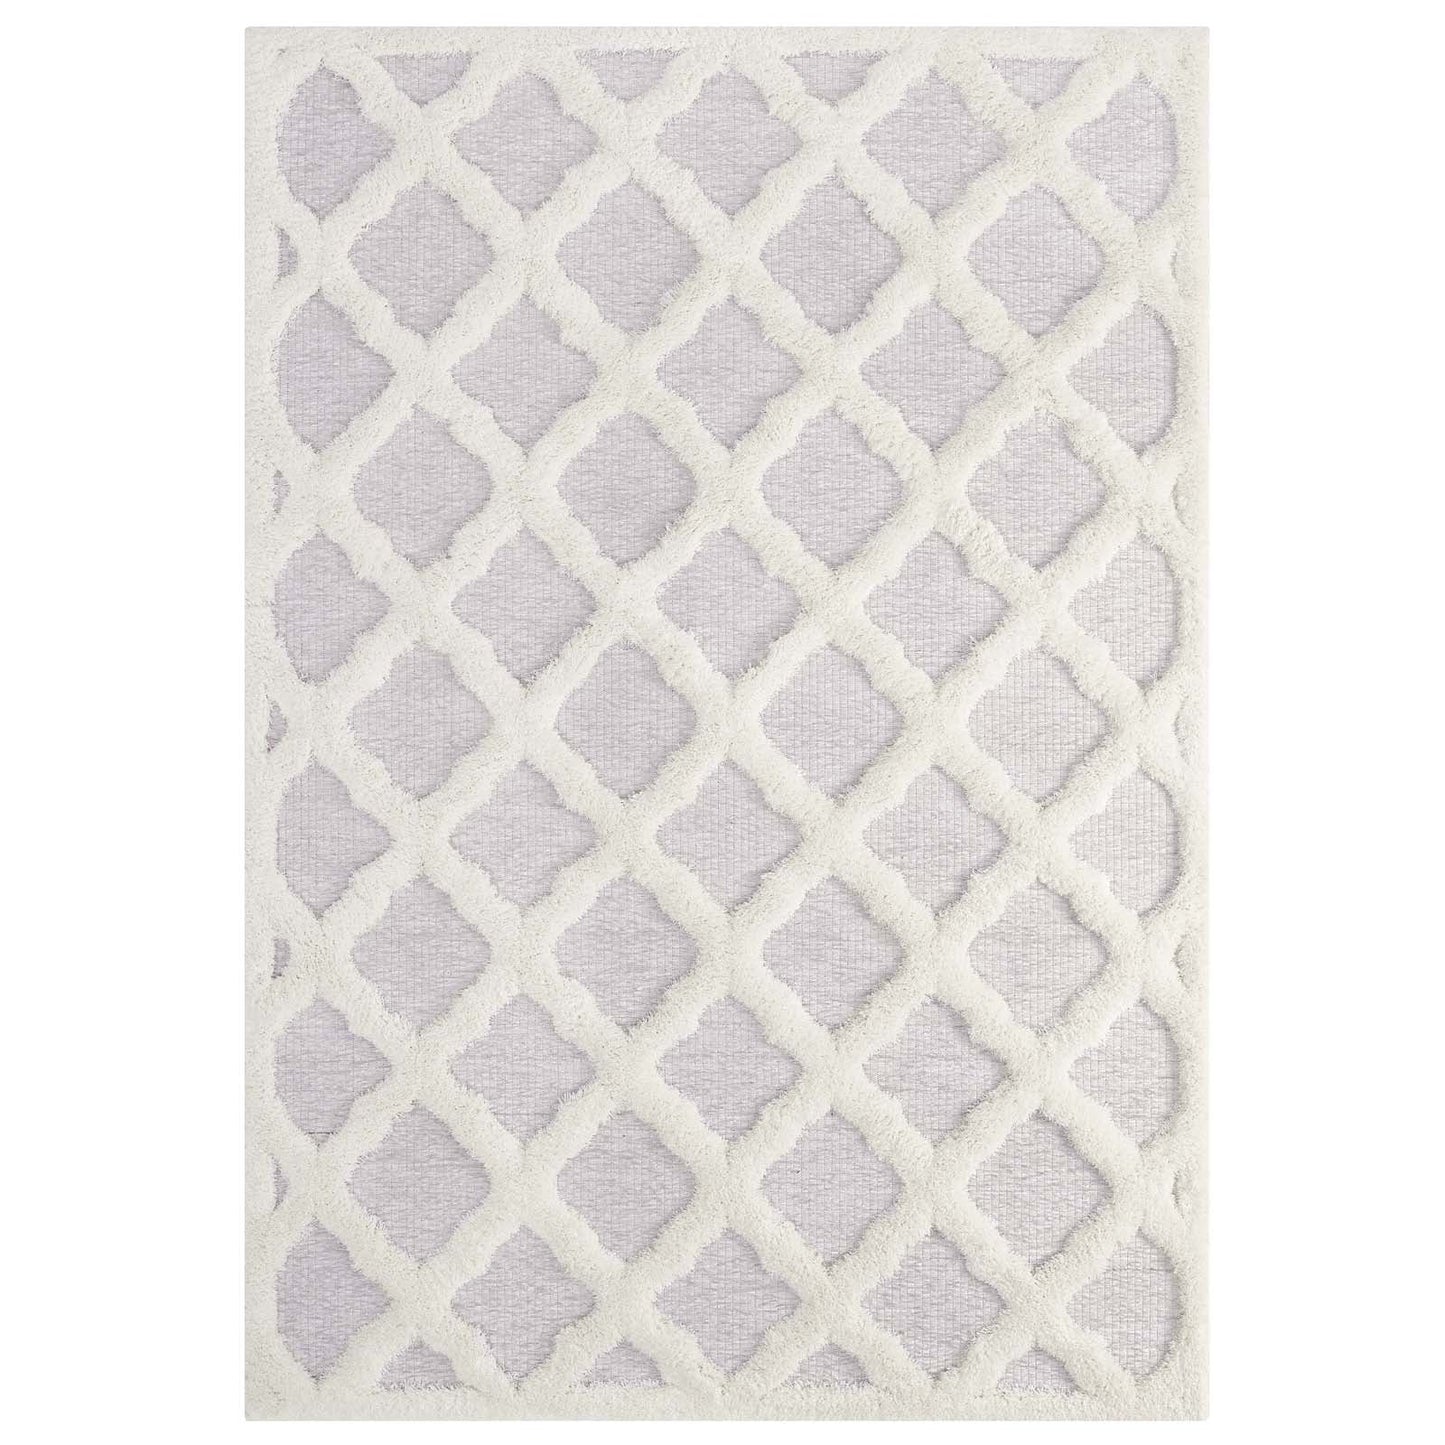 Whimsical Regale Abstract Moroccan Trellis Shag 5x8 Area Rug